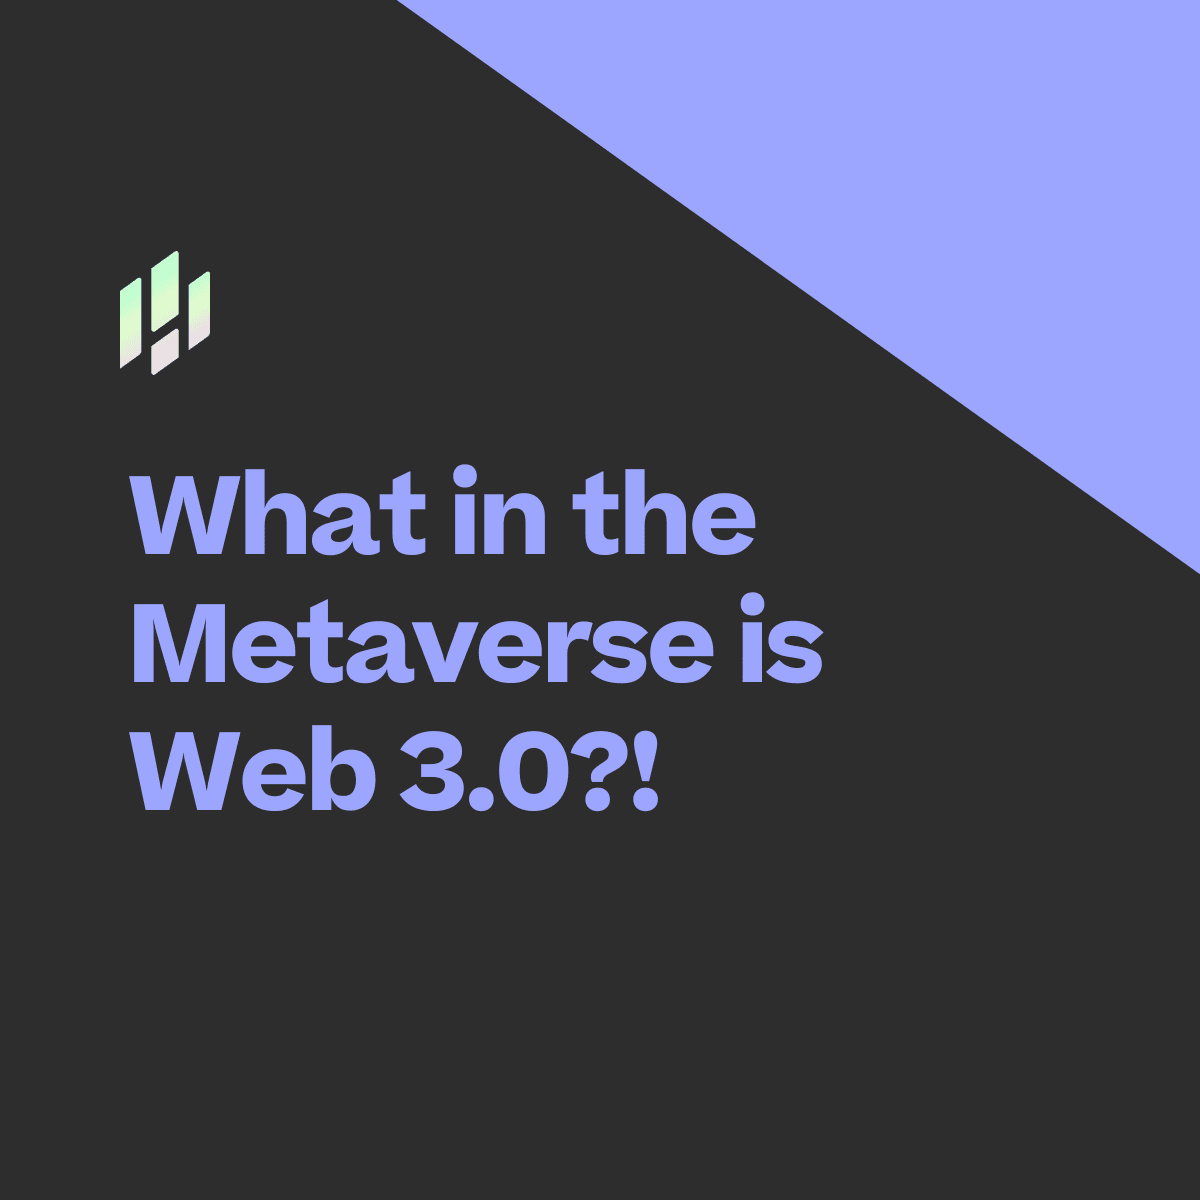 What in the Metaverse is Web 3.0?!